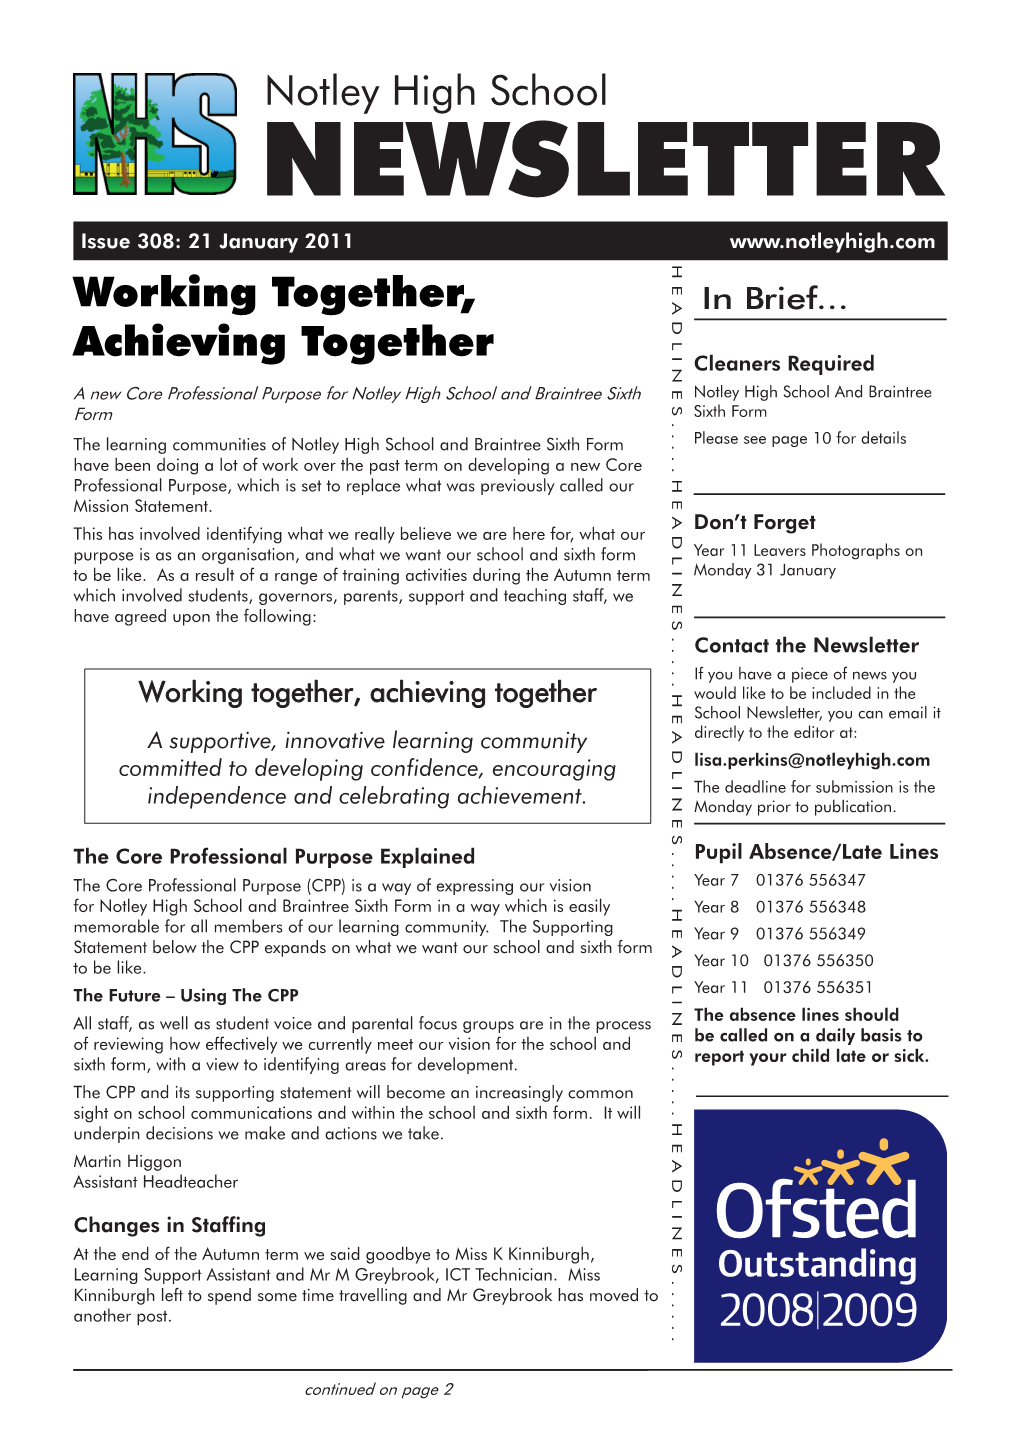 Notley High School NEWSLETTER Issue 308: 21 January 2011